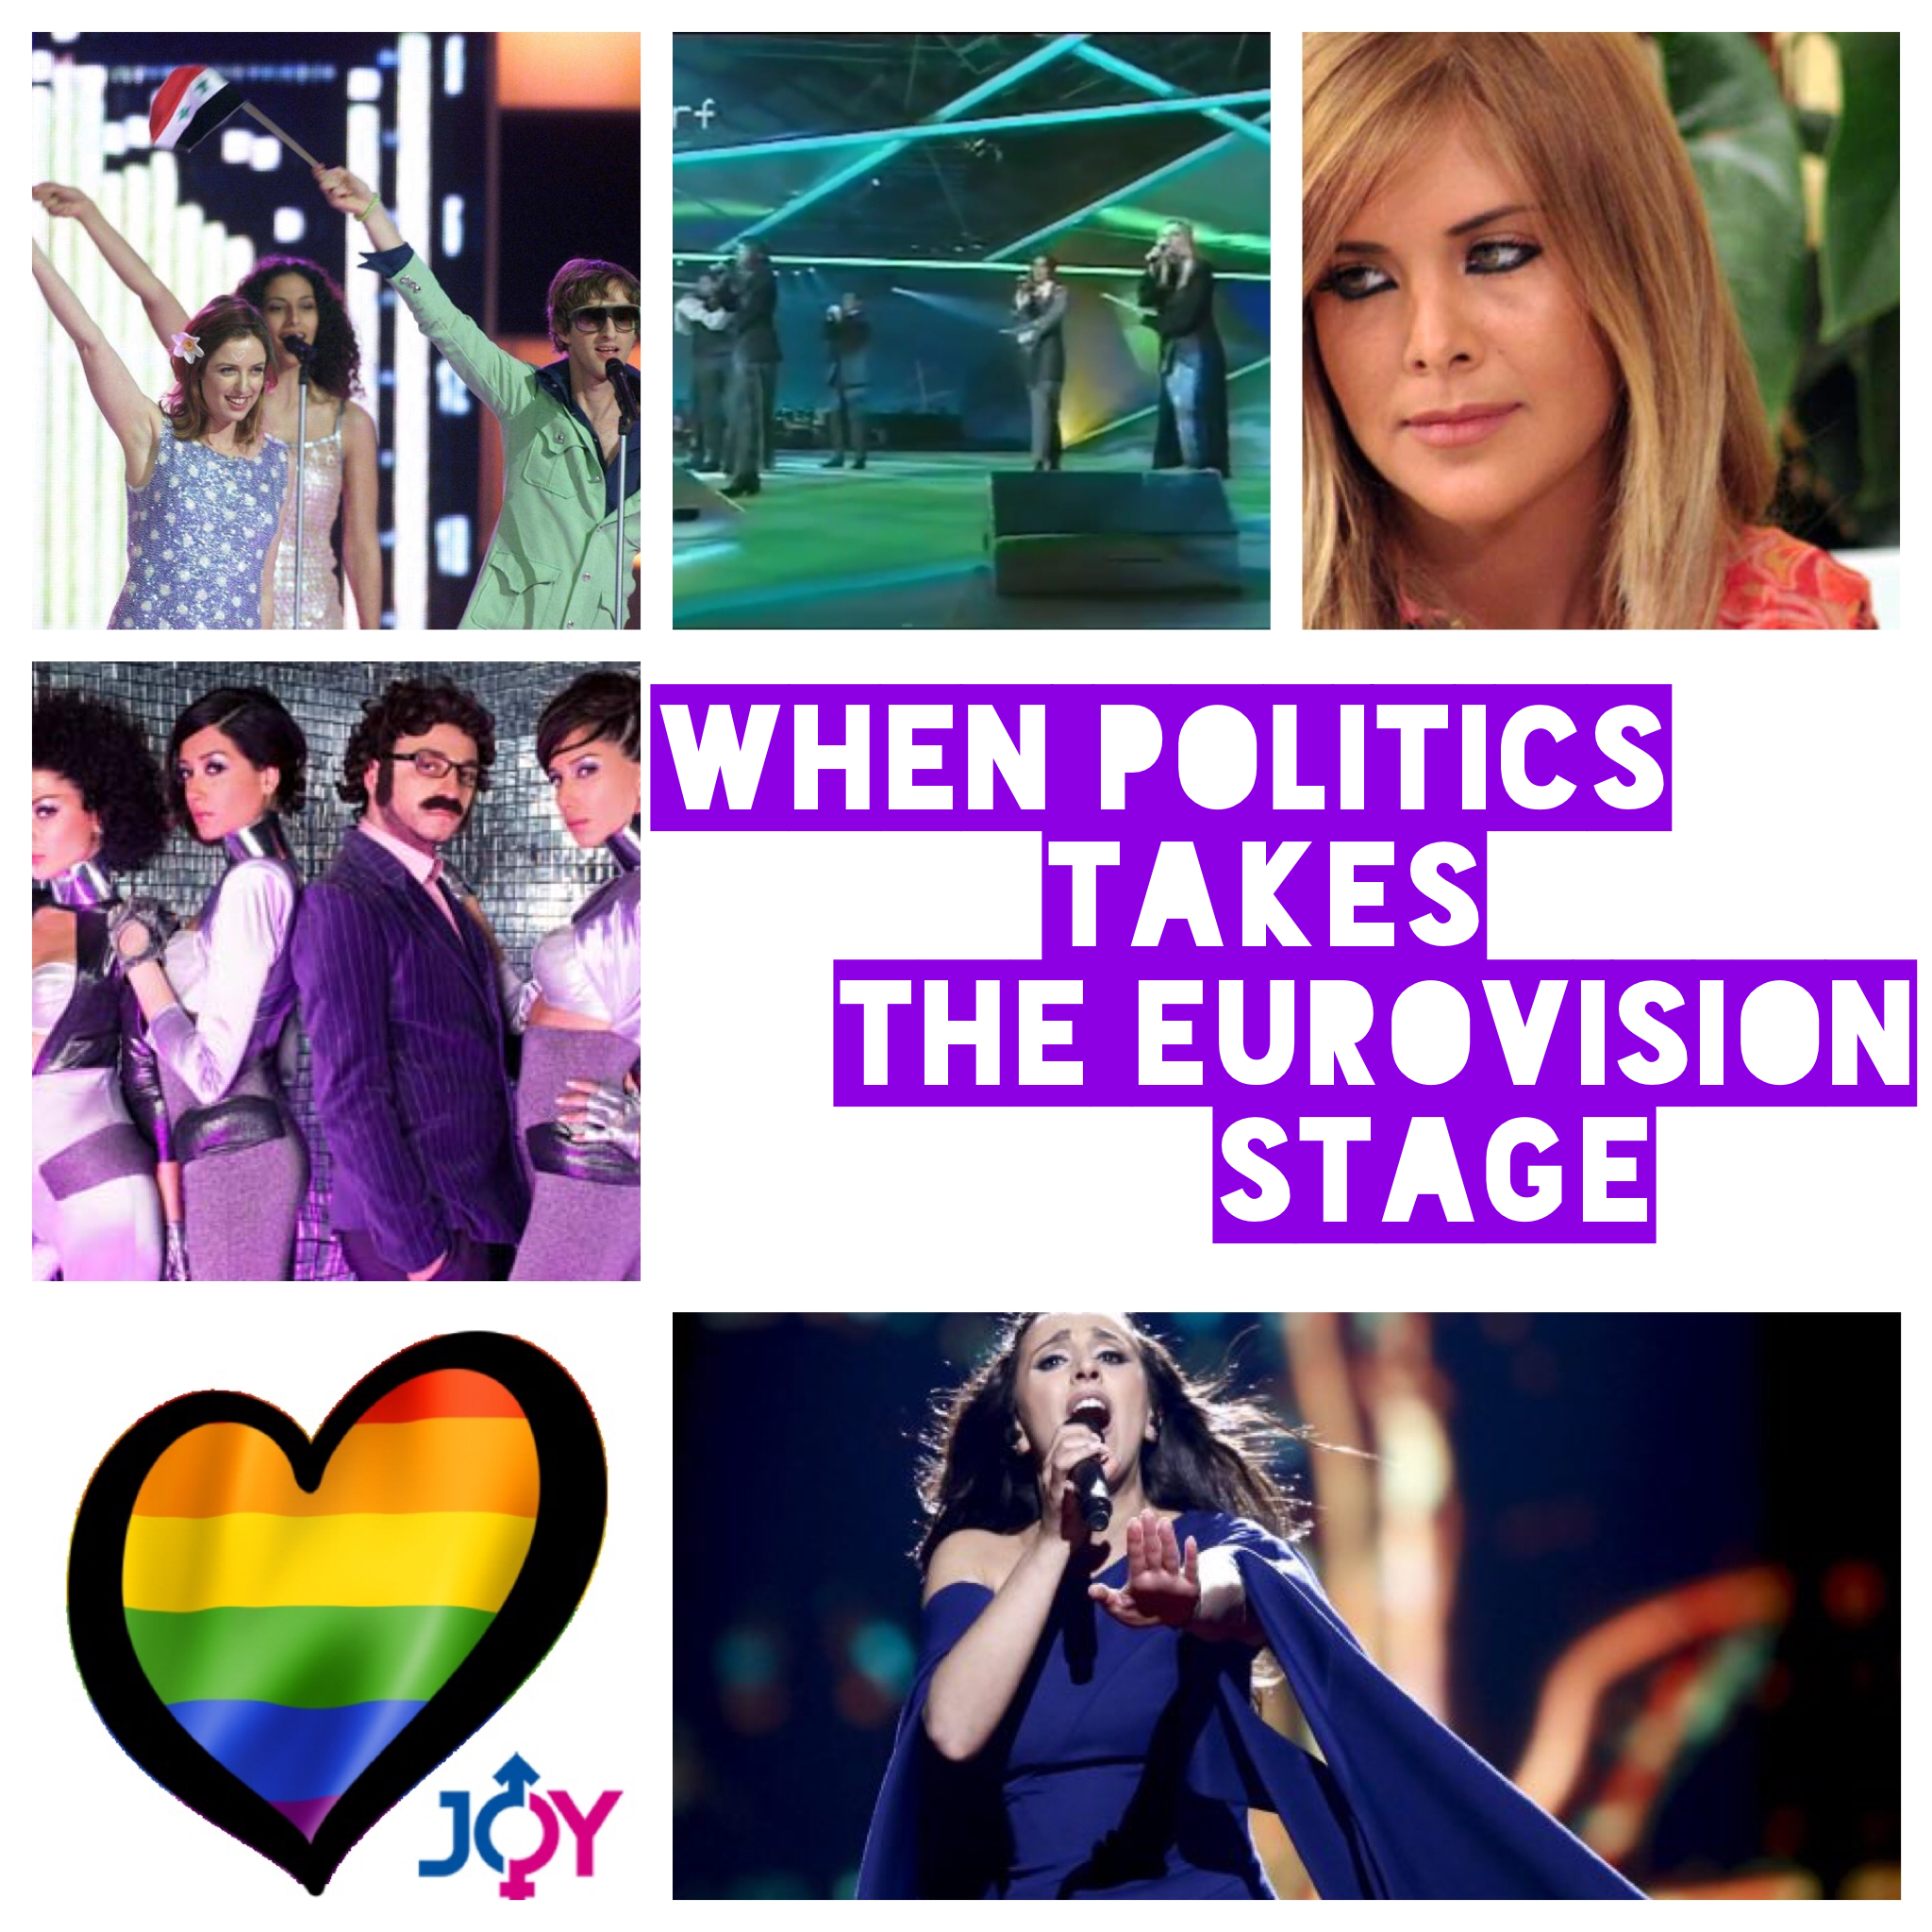 The Russia Issue: Politics and Eurovision